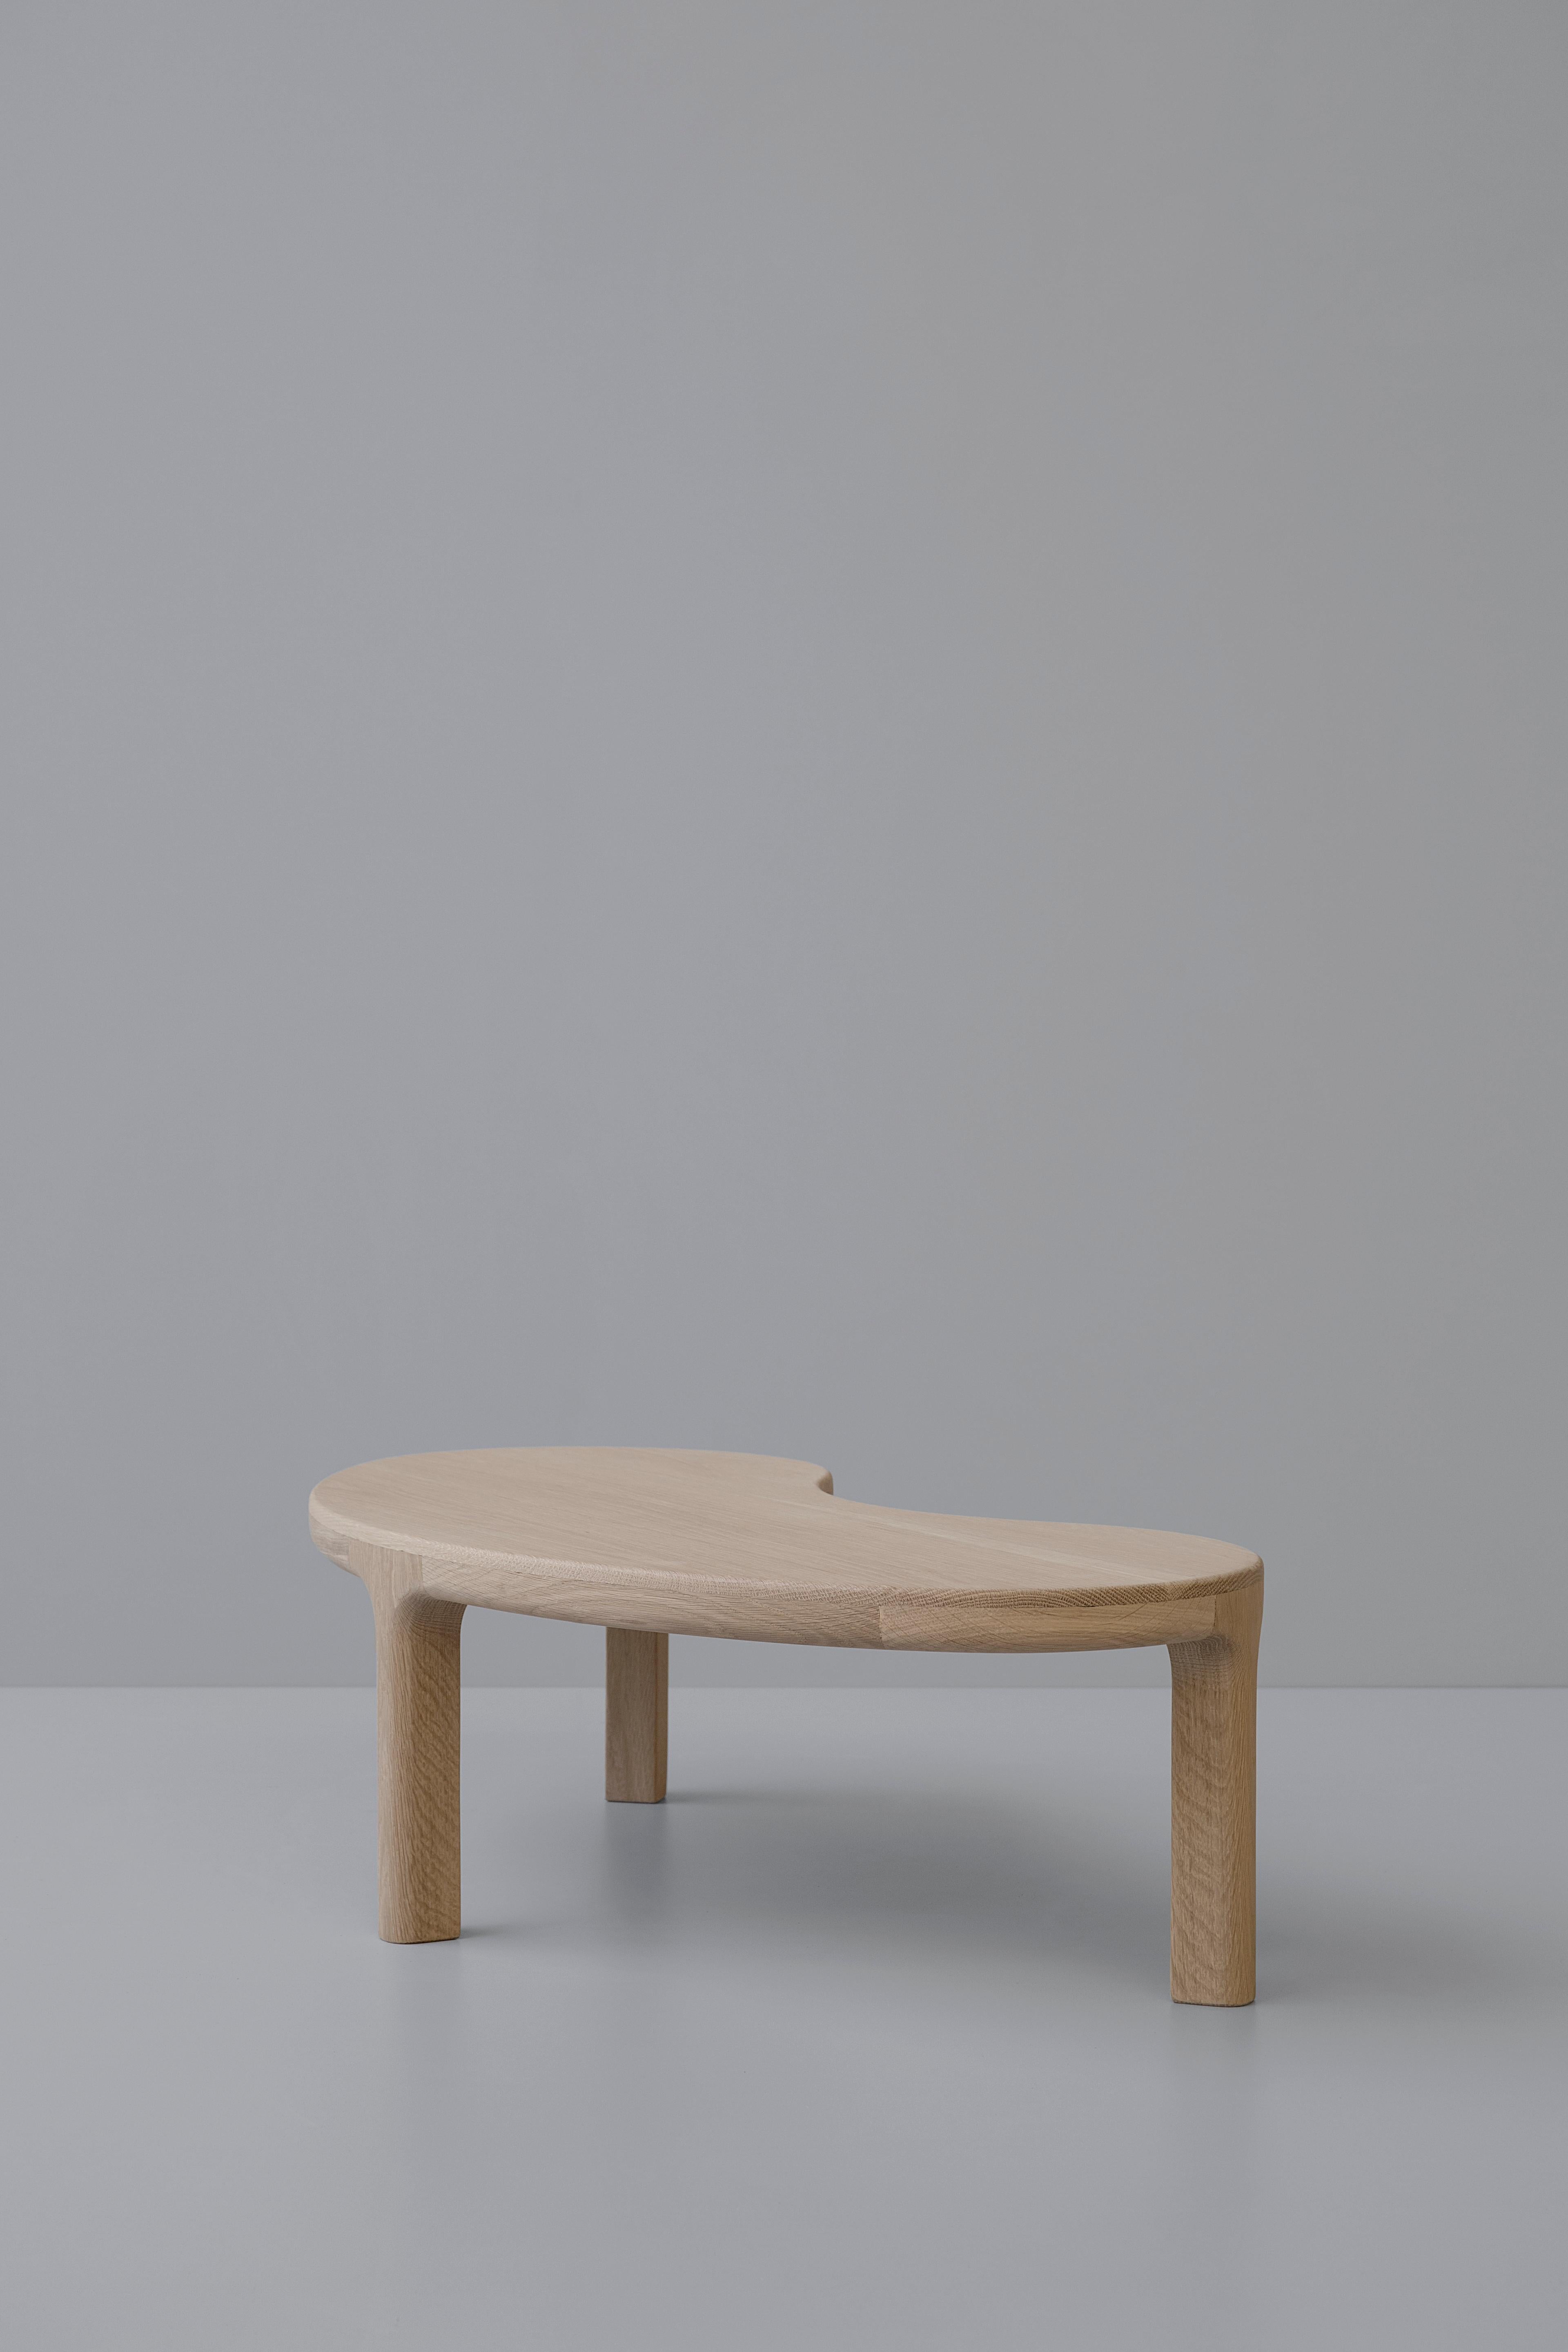 Trasiego coffee table by Arturo Verástegui
Dimensions: D 100 x W 47 x H 27 cm
Materials: oak wood.

White natural oak table.

Sebastián Angeles is an Industrial Designer originally from Mexico City who graduated from the Anáhuac Mexico